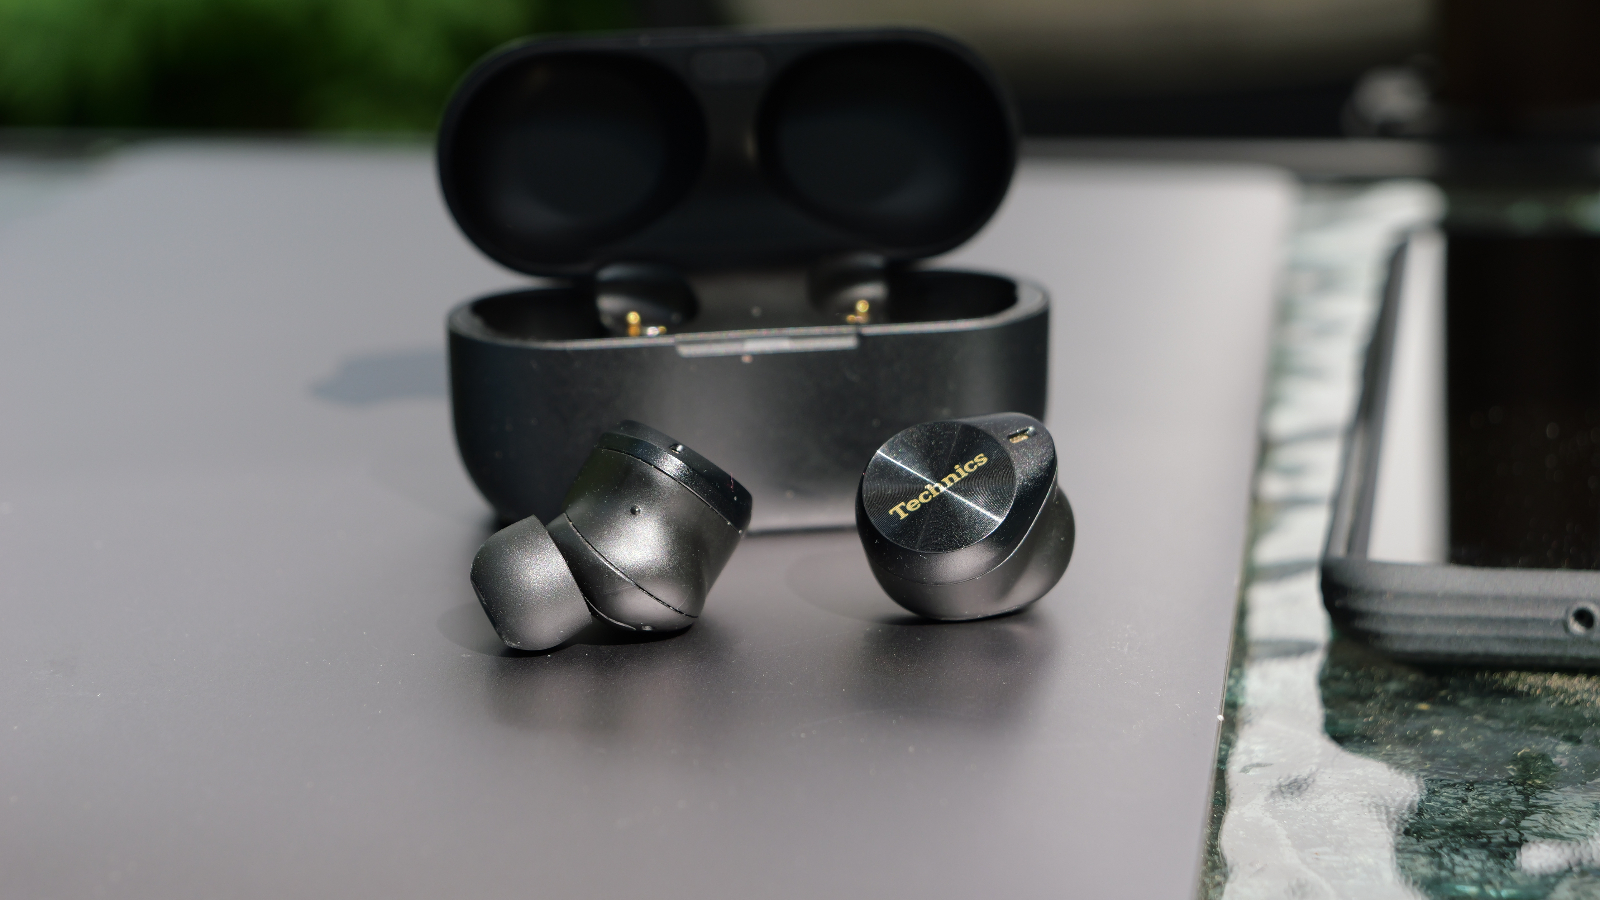 Technics EAH-AZ80 earbuds review: Audio and ANC like it was meant to be